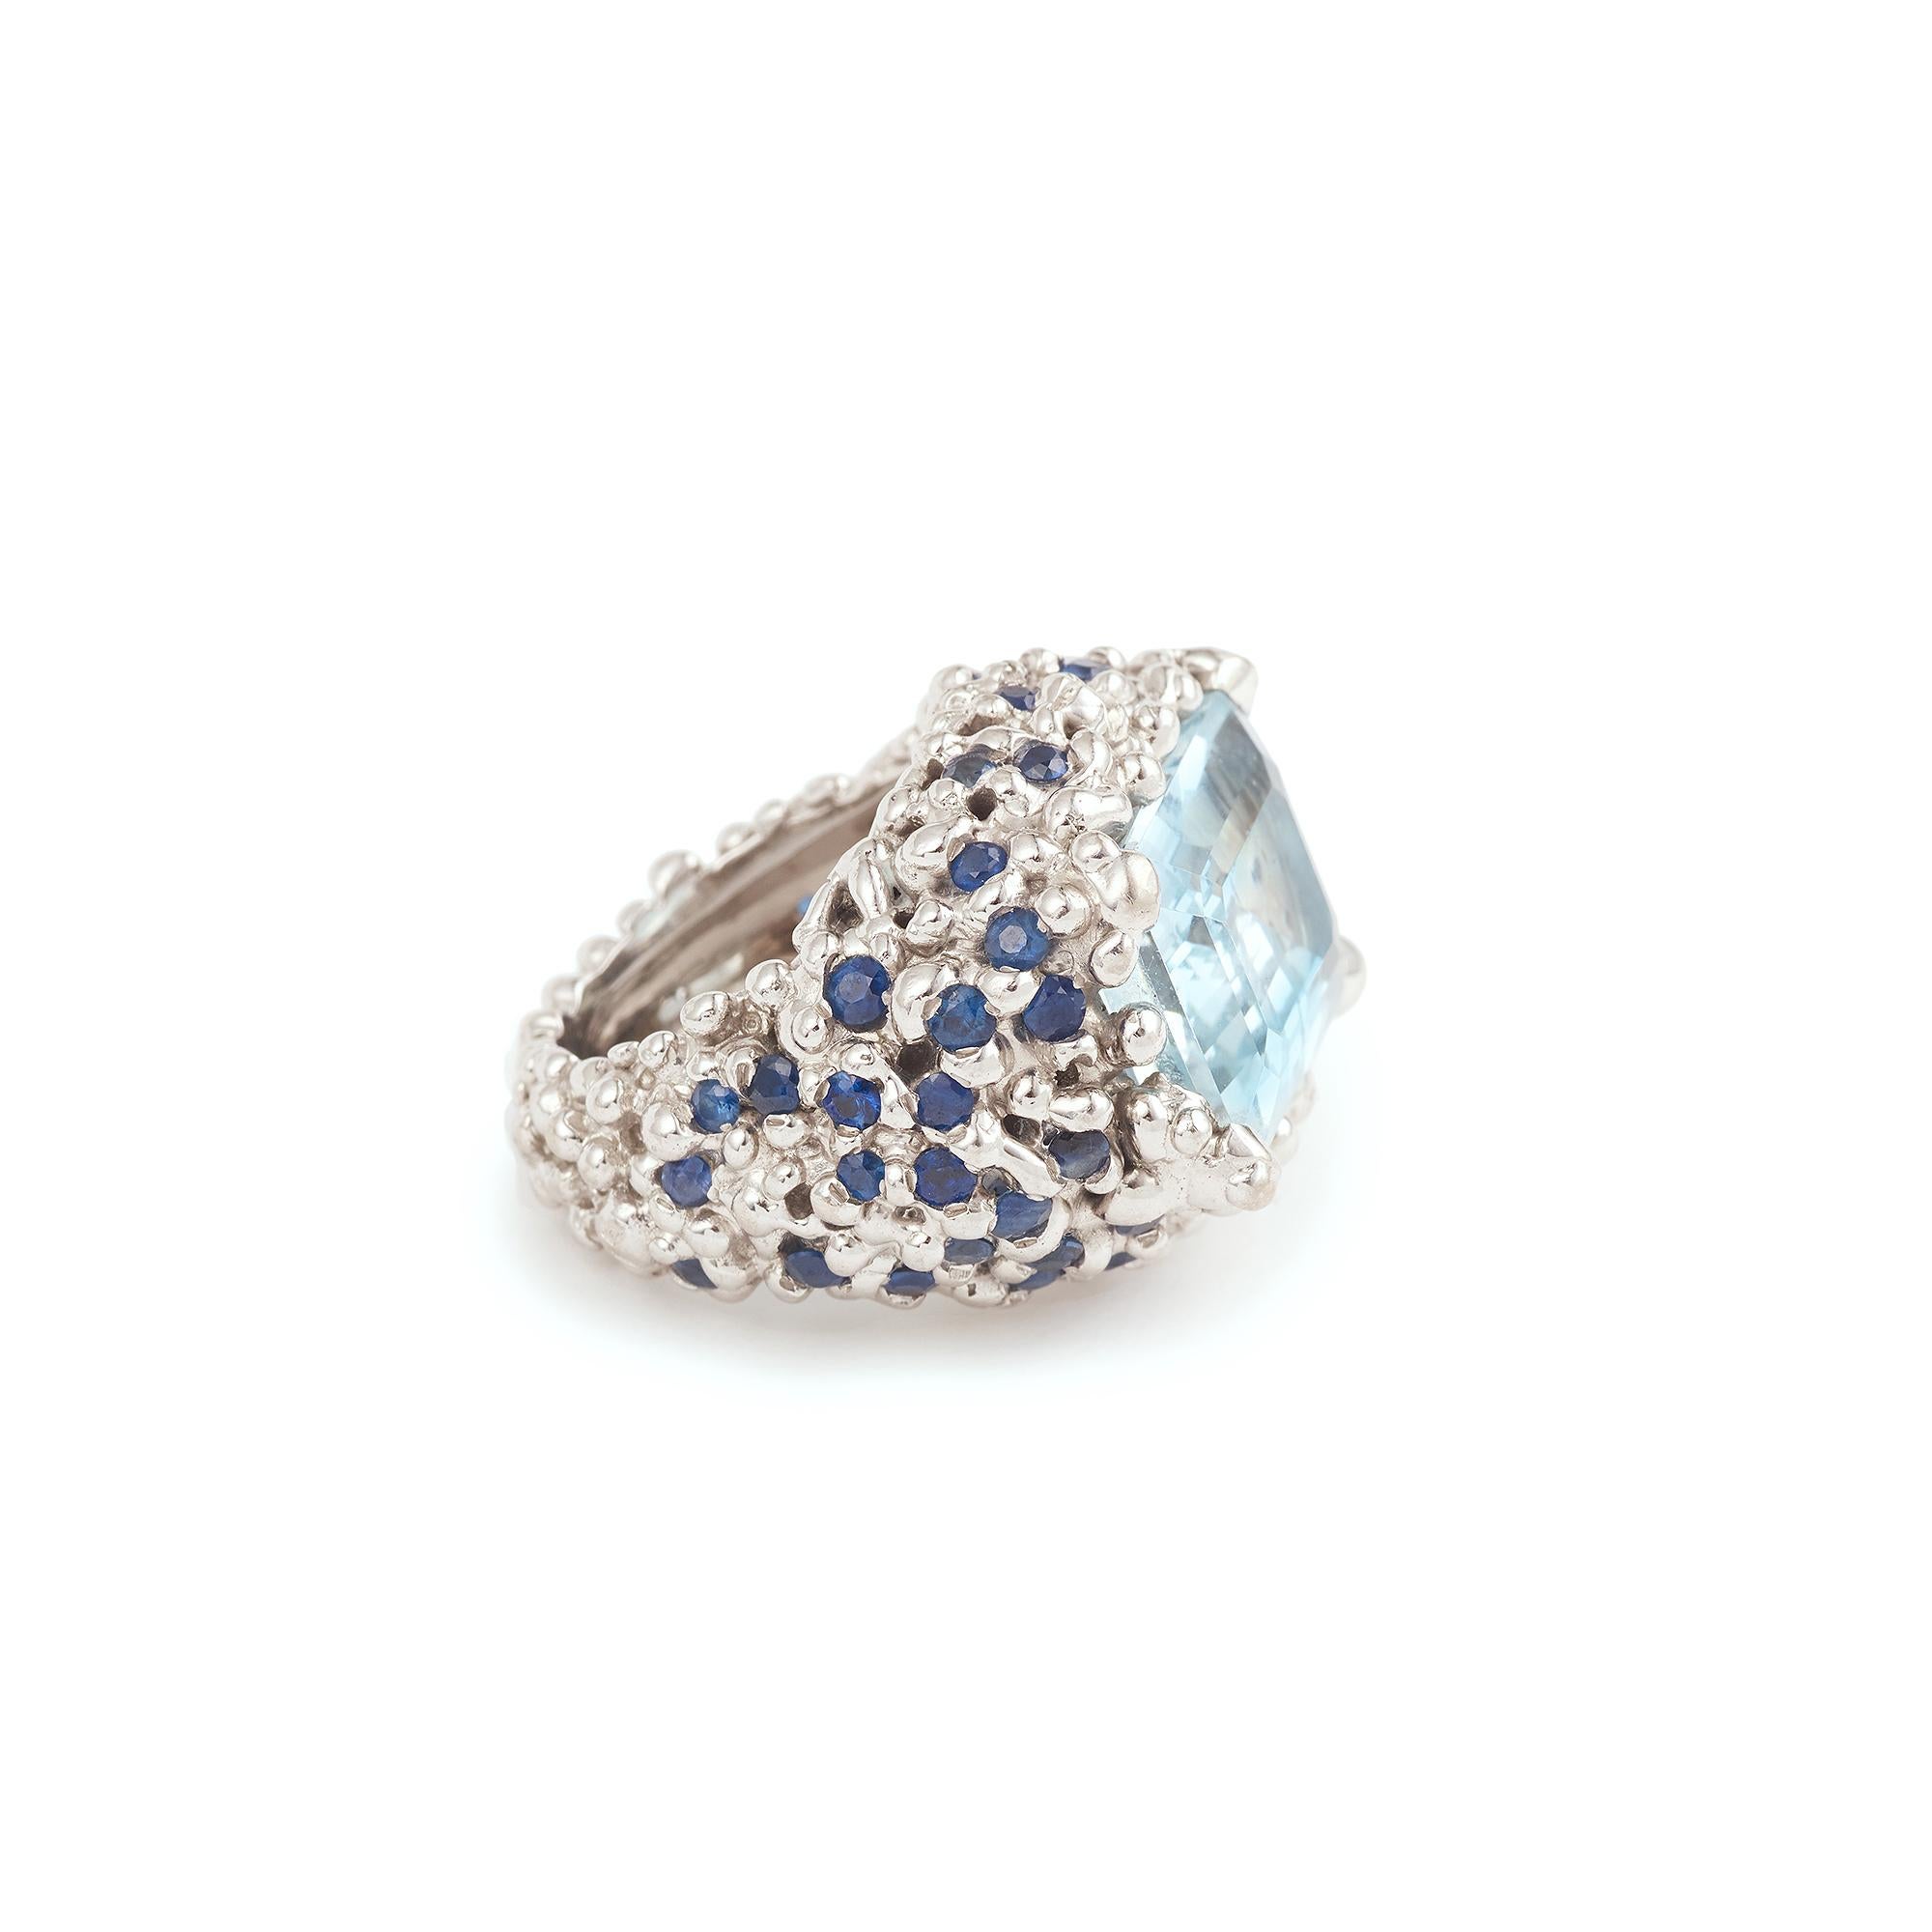 A large white gold Cocktail ring set with a rectangle-cut aquamarine and a pavement of brilliant-cut sapphires.

Antoine Camus workshop (not signed)!

Ring size: 20.59 x 26.13 x 10.09 mm (0.810 x 1.028 x 0.397 inches)

Aquamarine dimensions: 11.85 x